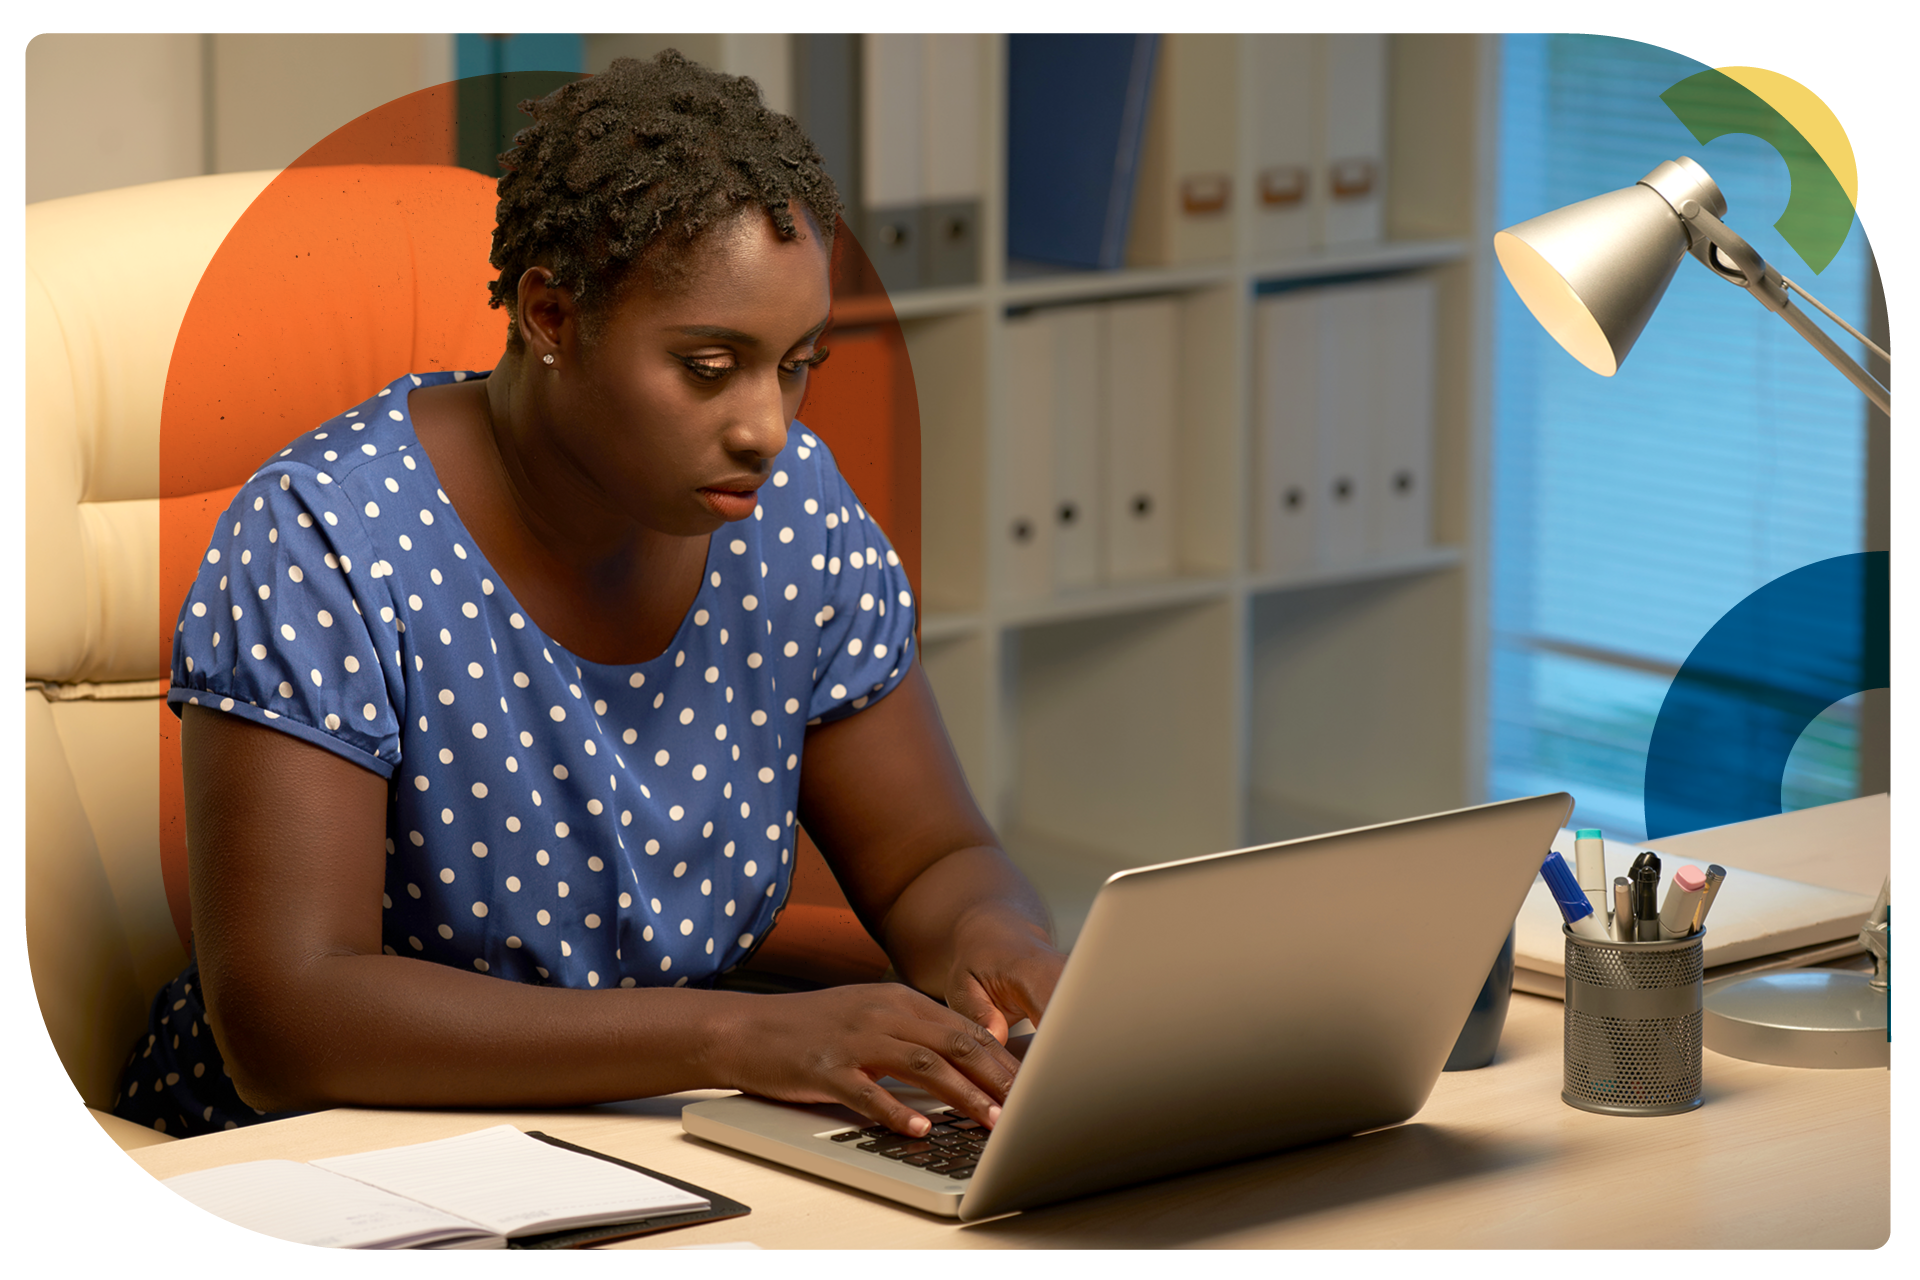 An african american woman in a blue polka dot blouse is sitting at a desk in front of a laptop typing and focused in on the screen